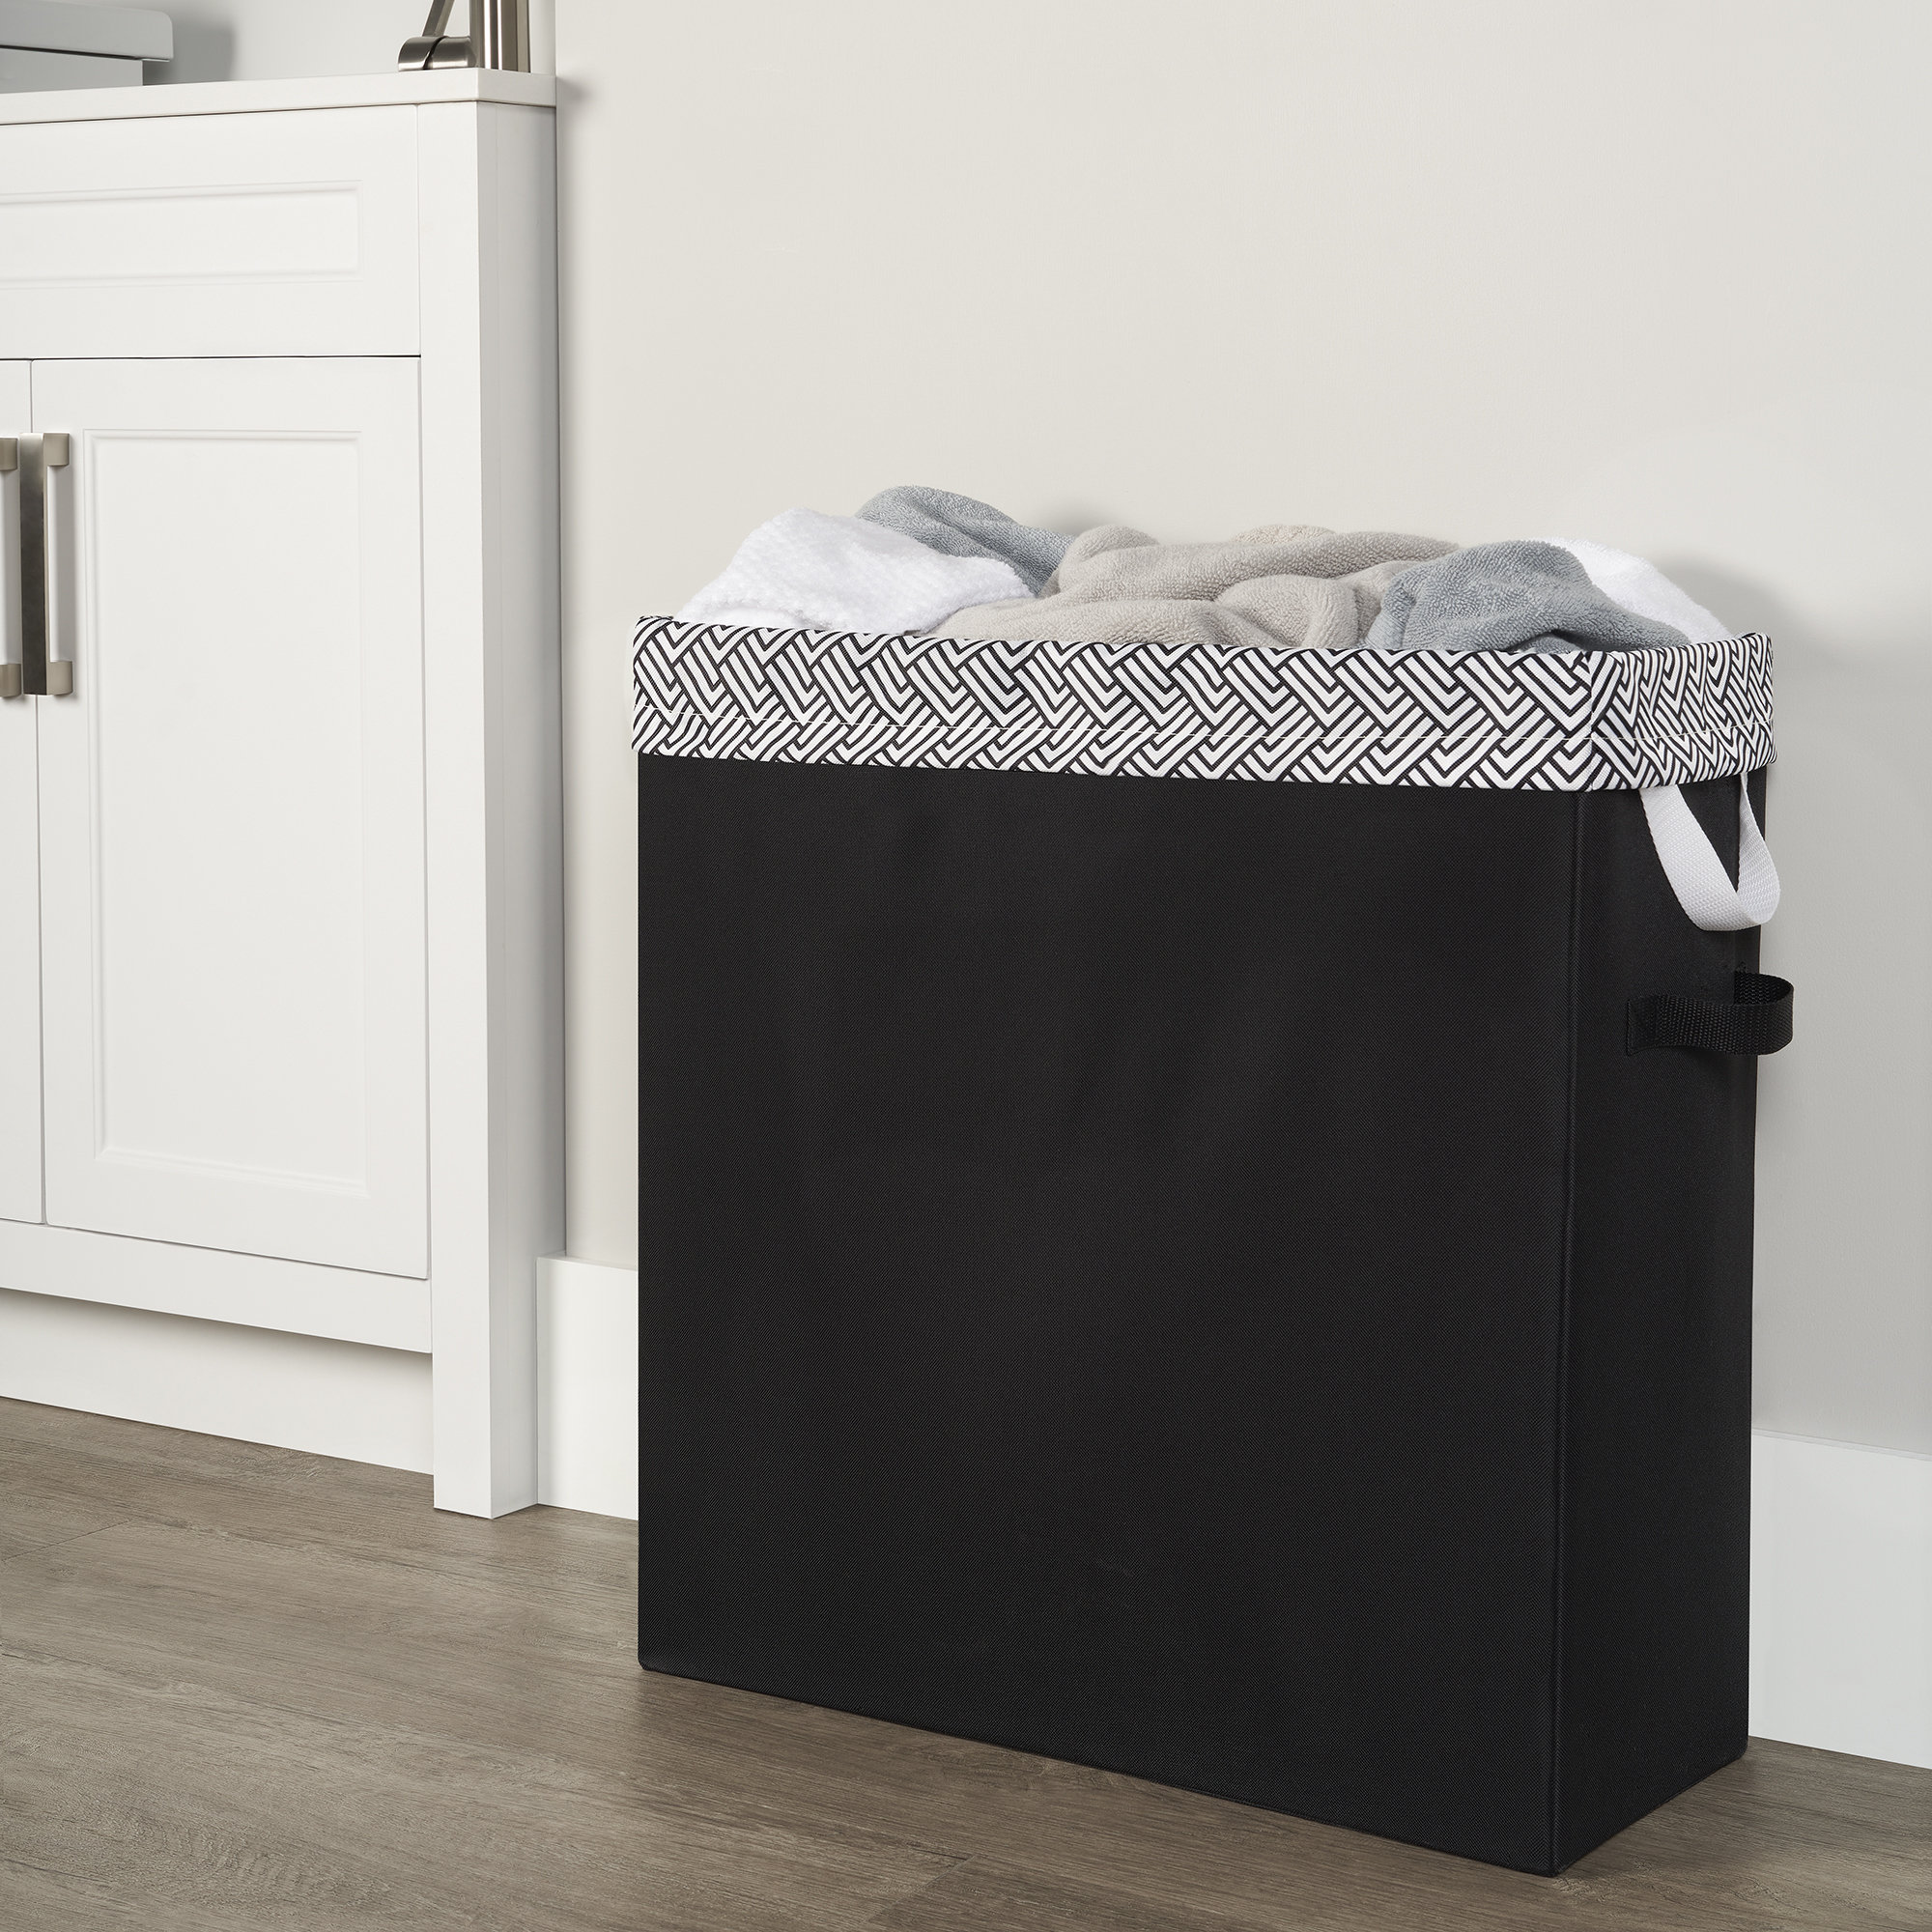 Fabric Laundry Hamper with Handles